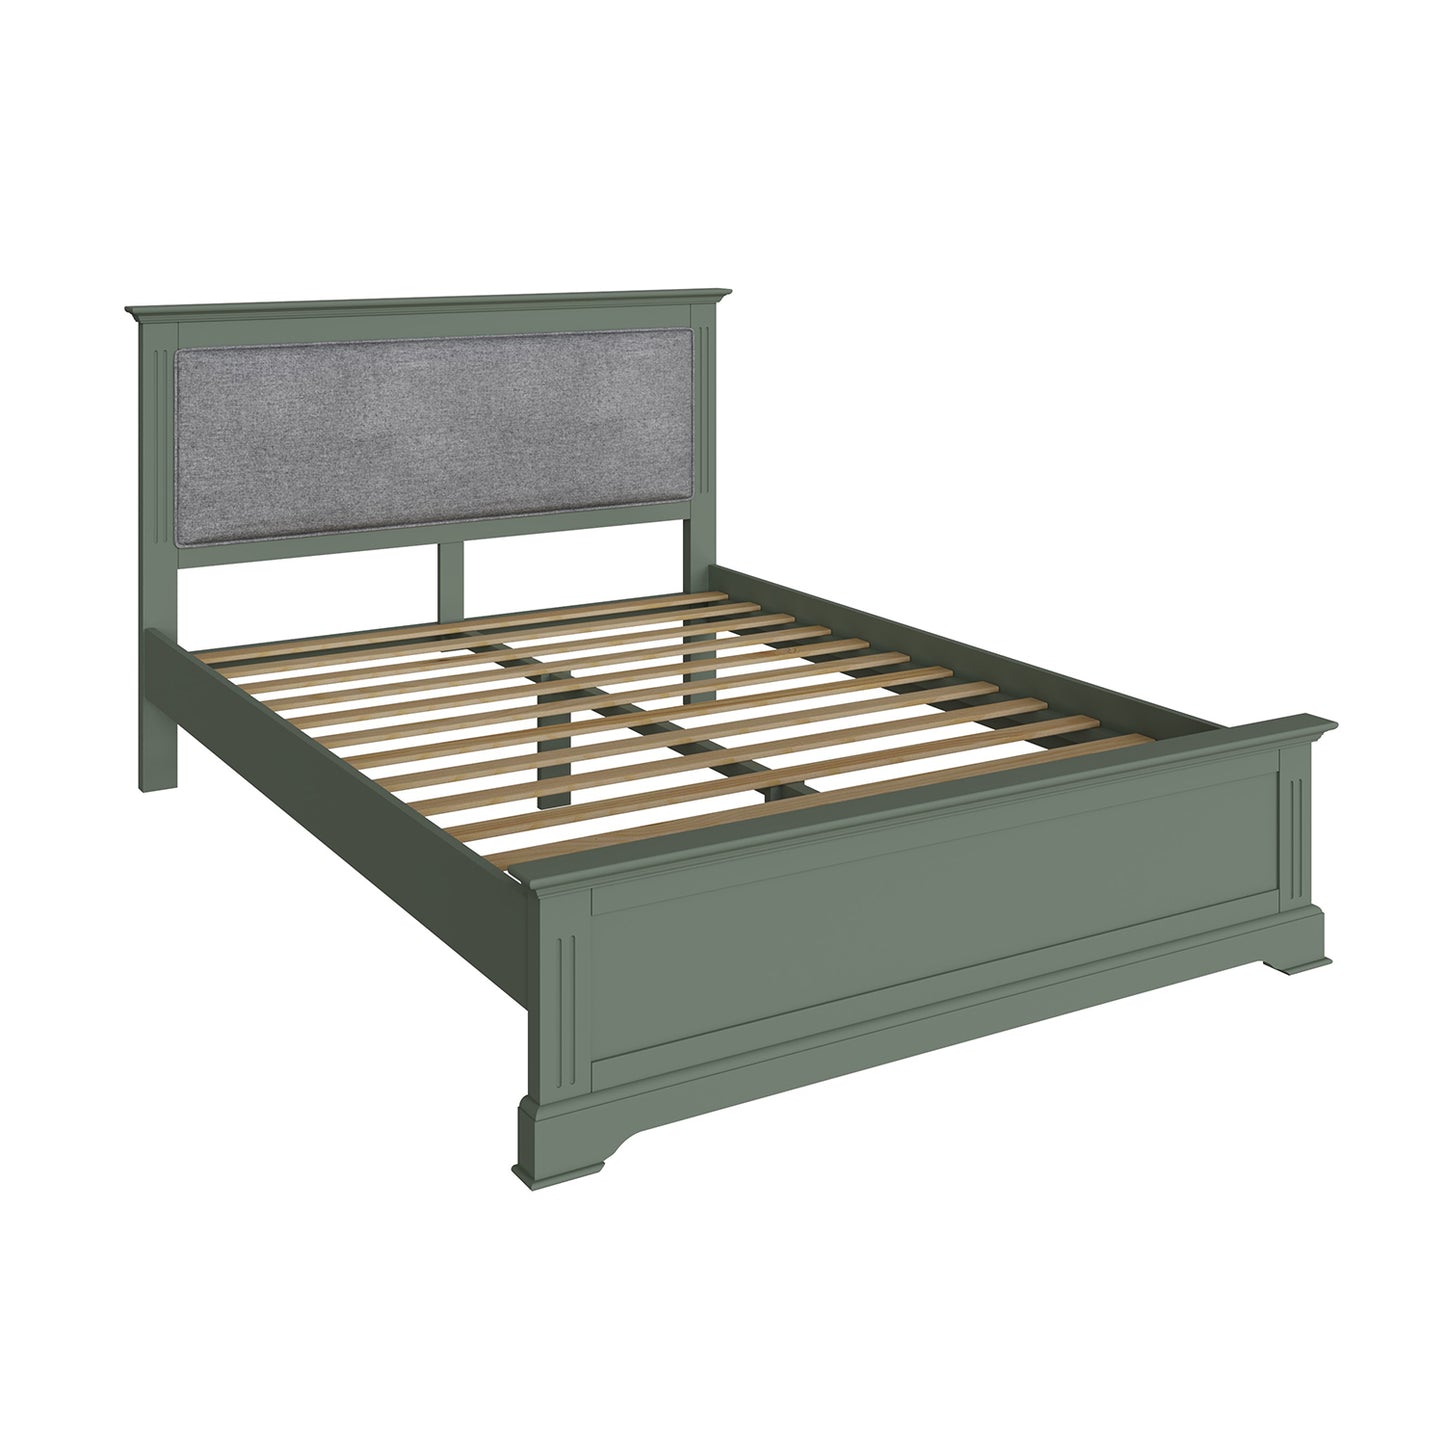 Olive Painted Beds With Upholstered Headboards